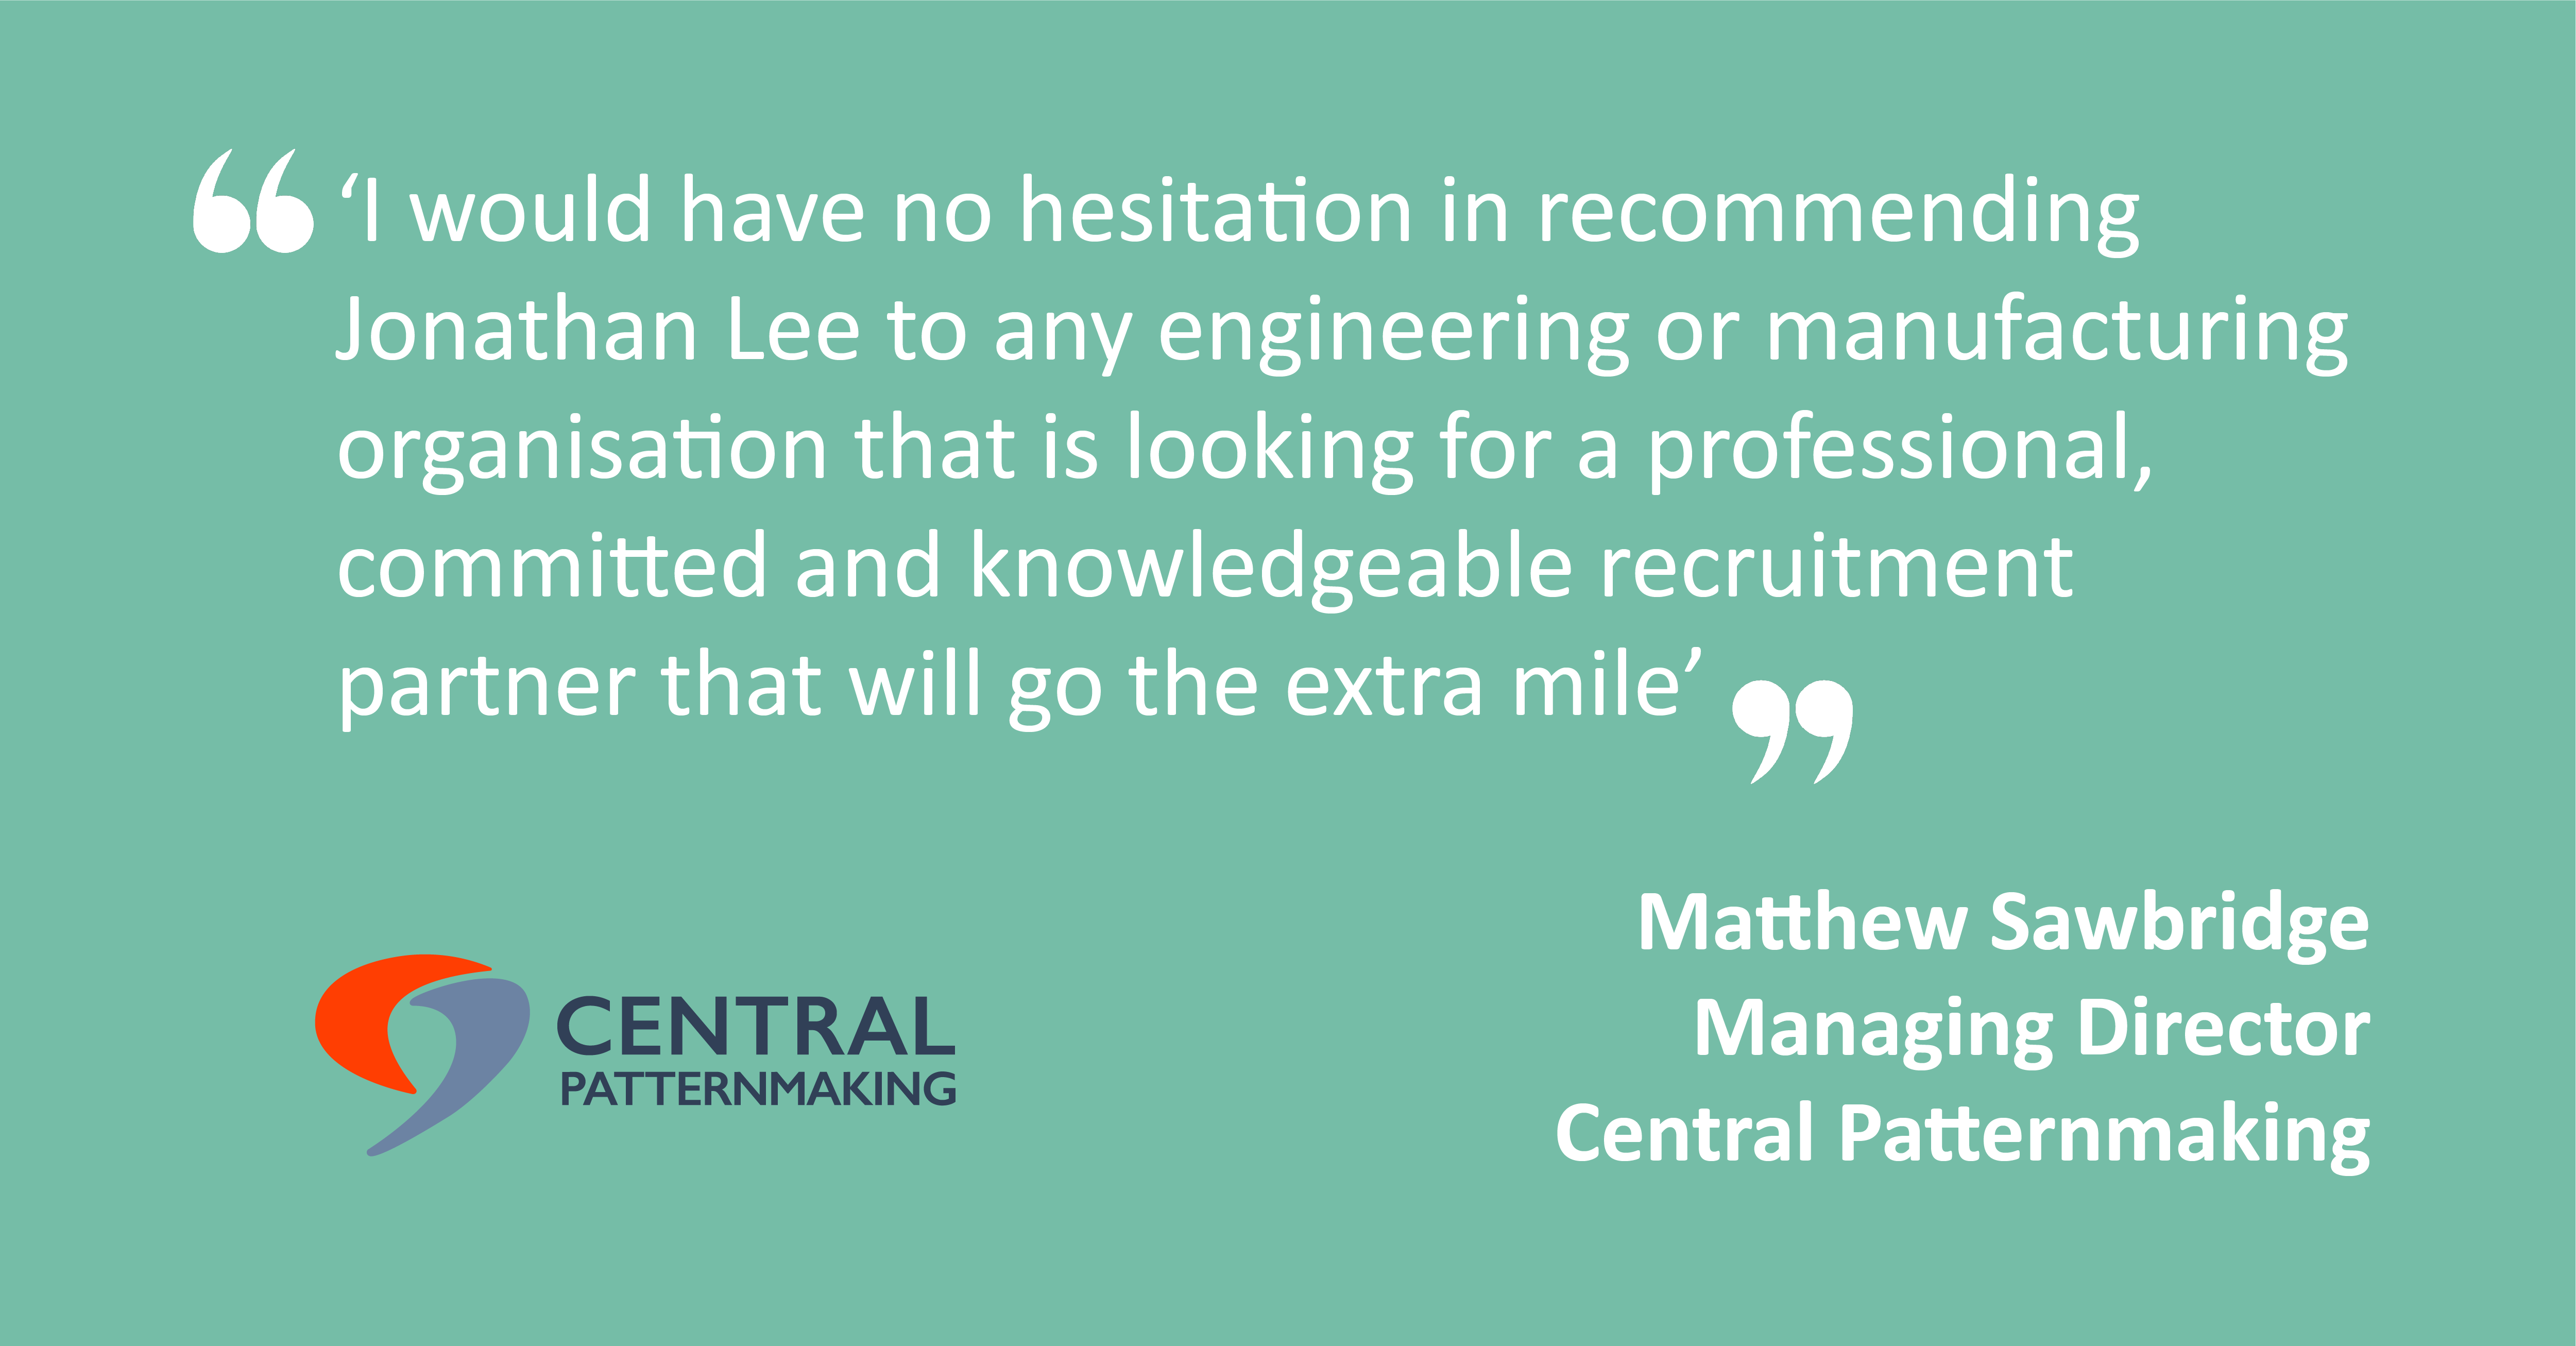 Central Patternmaking & Jonathan Lee Recruitment case study